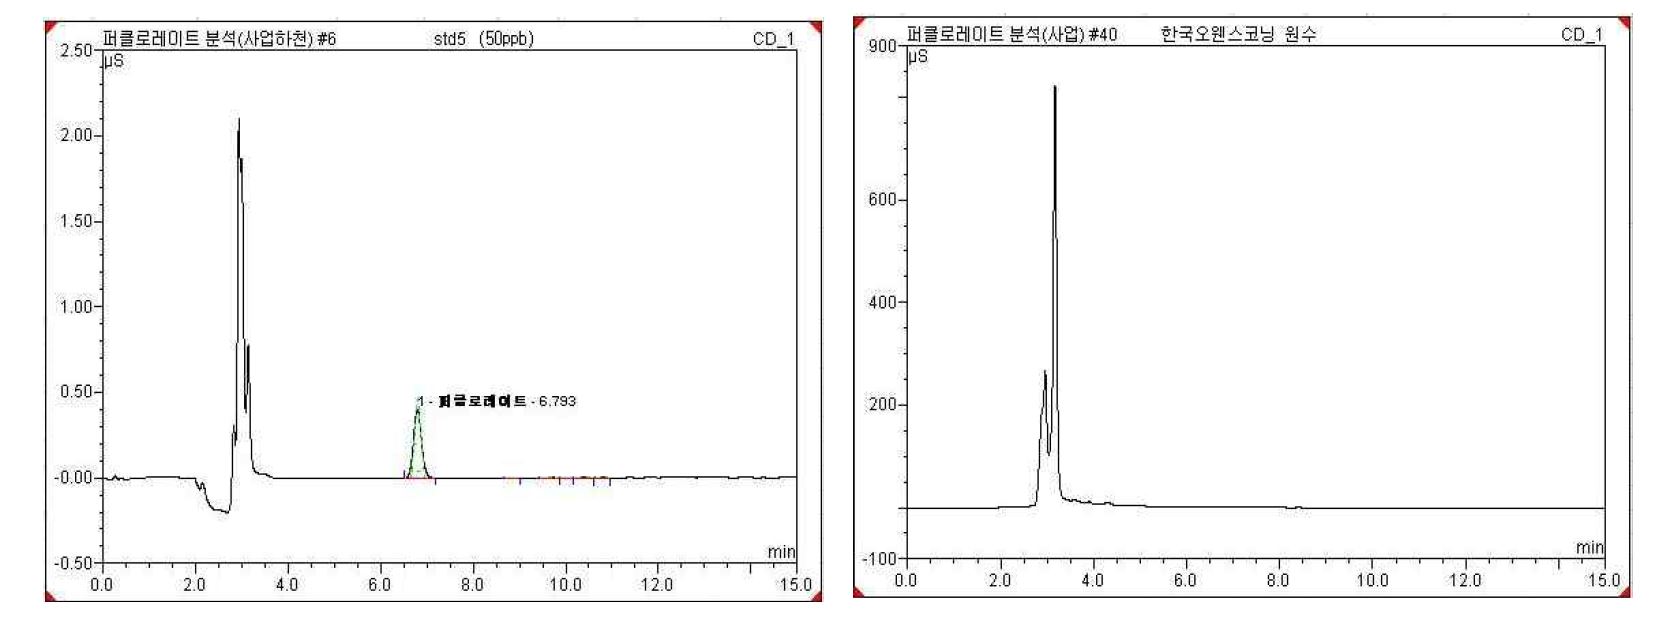 Ion chromatograms of perchlorate